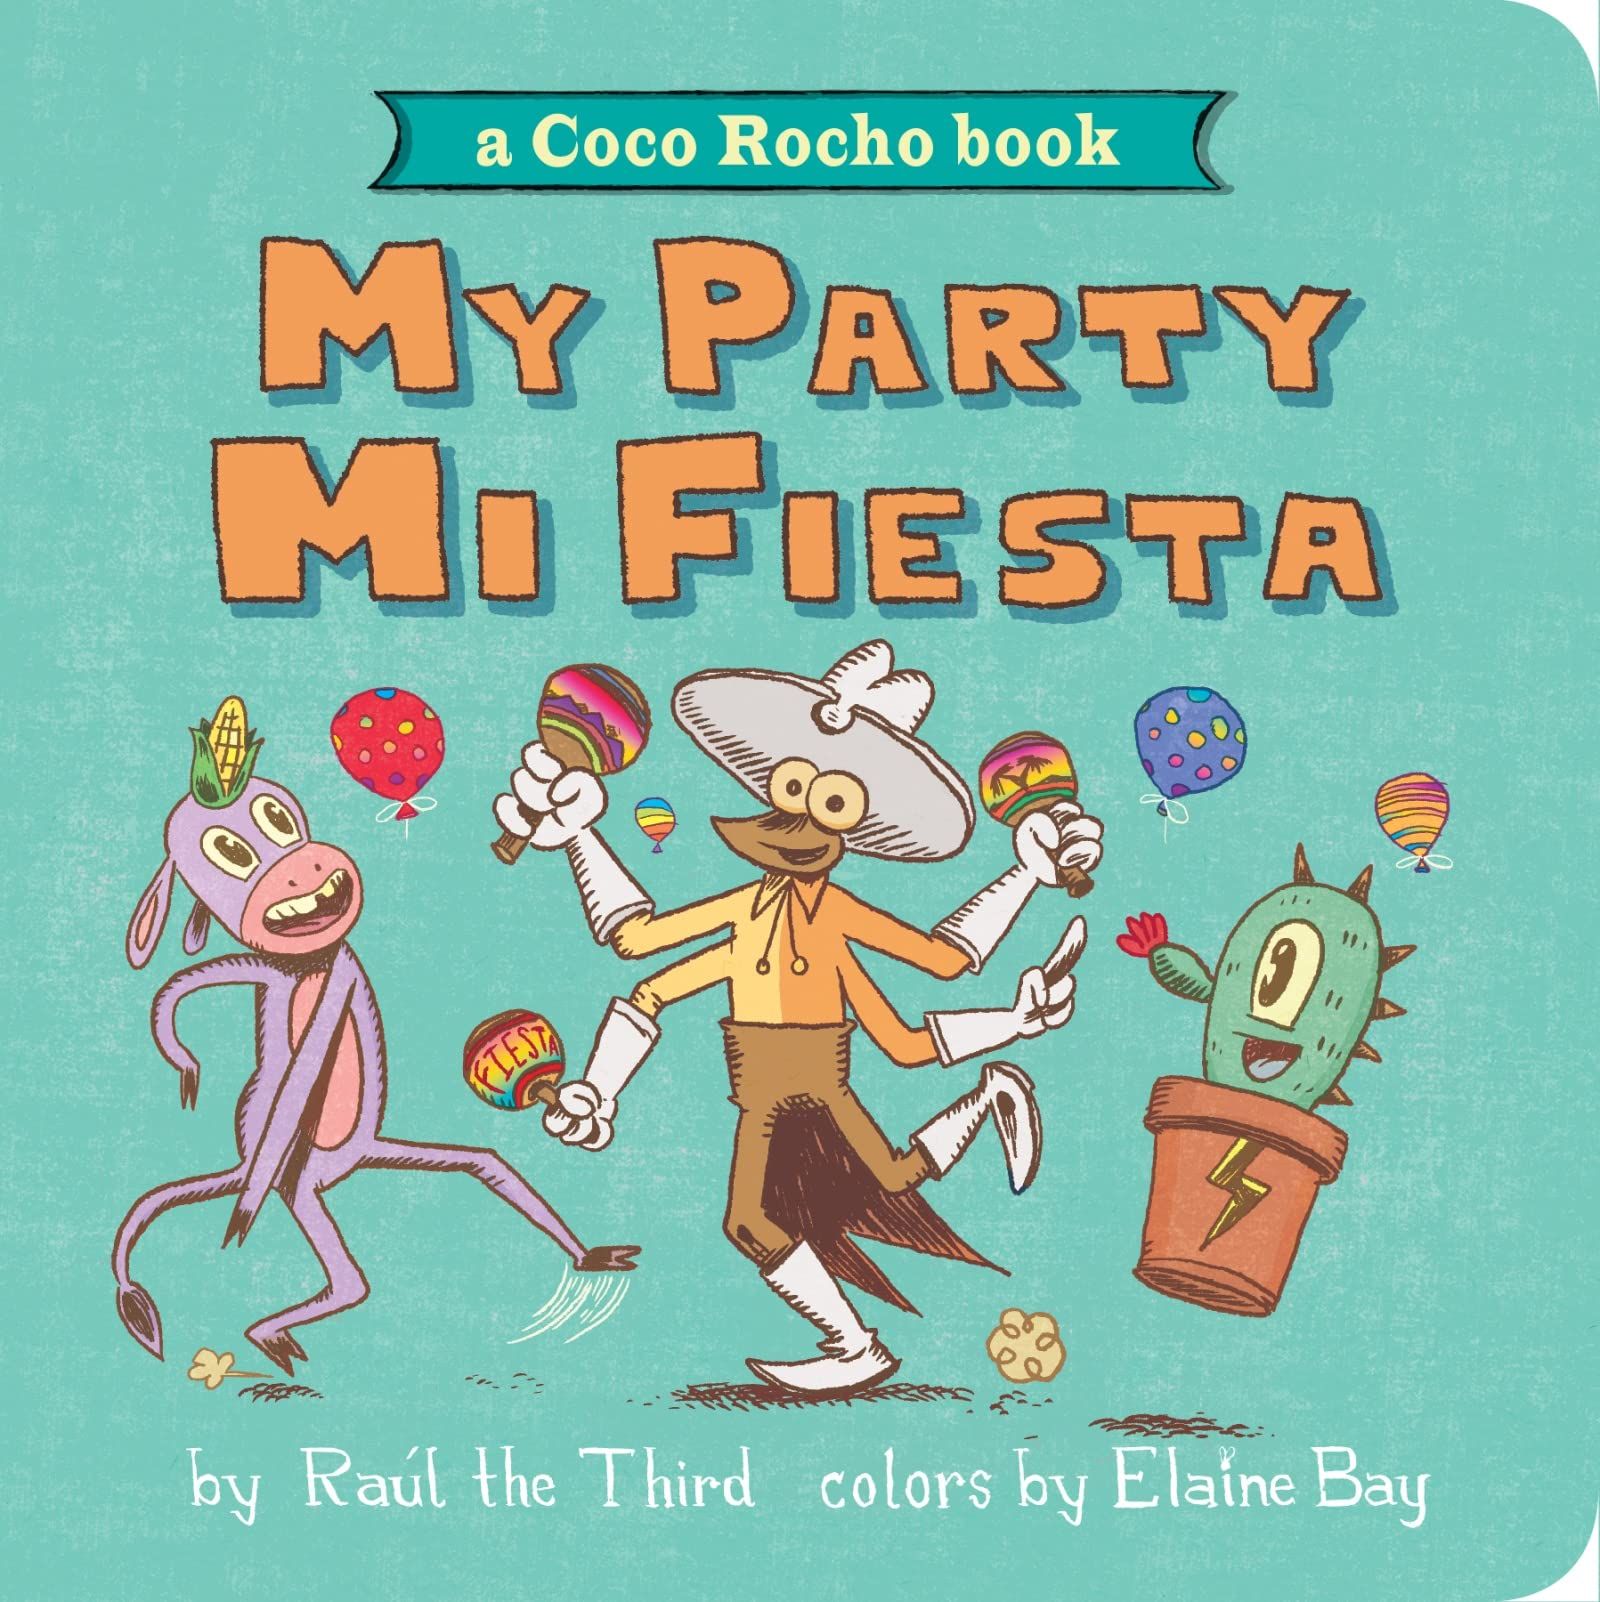 <p><strong>$6.99</strong></p><p>This bilingual board book centers around a first birthday party, so it's the perfect introduction to the concept for little readers. It's also a great way to start teaching both English and Spanish grammar.</p>